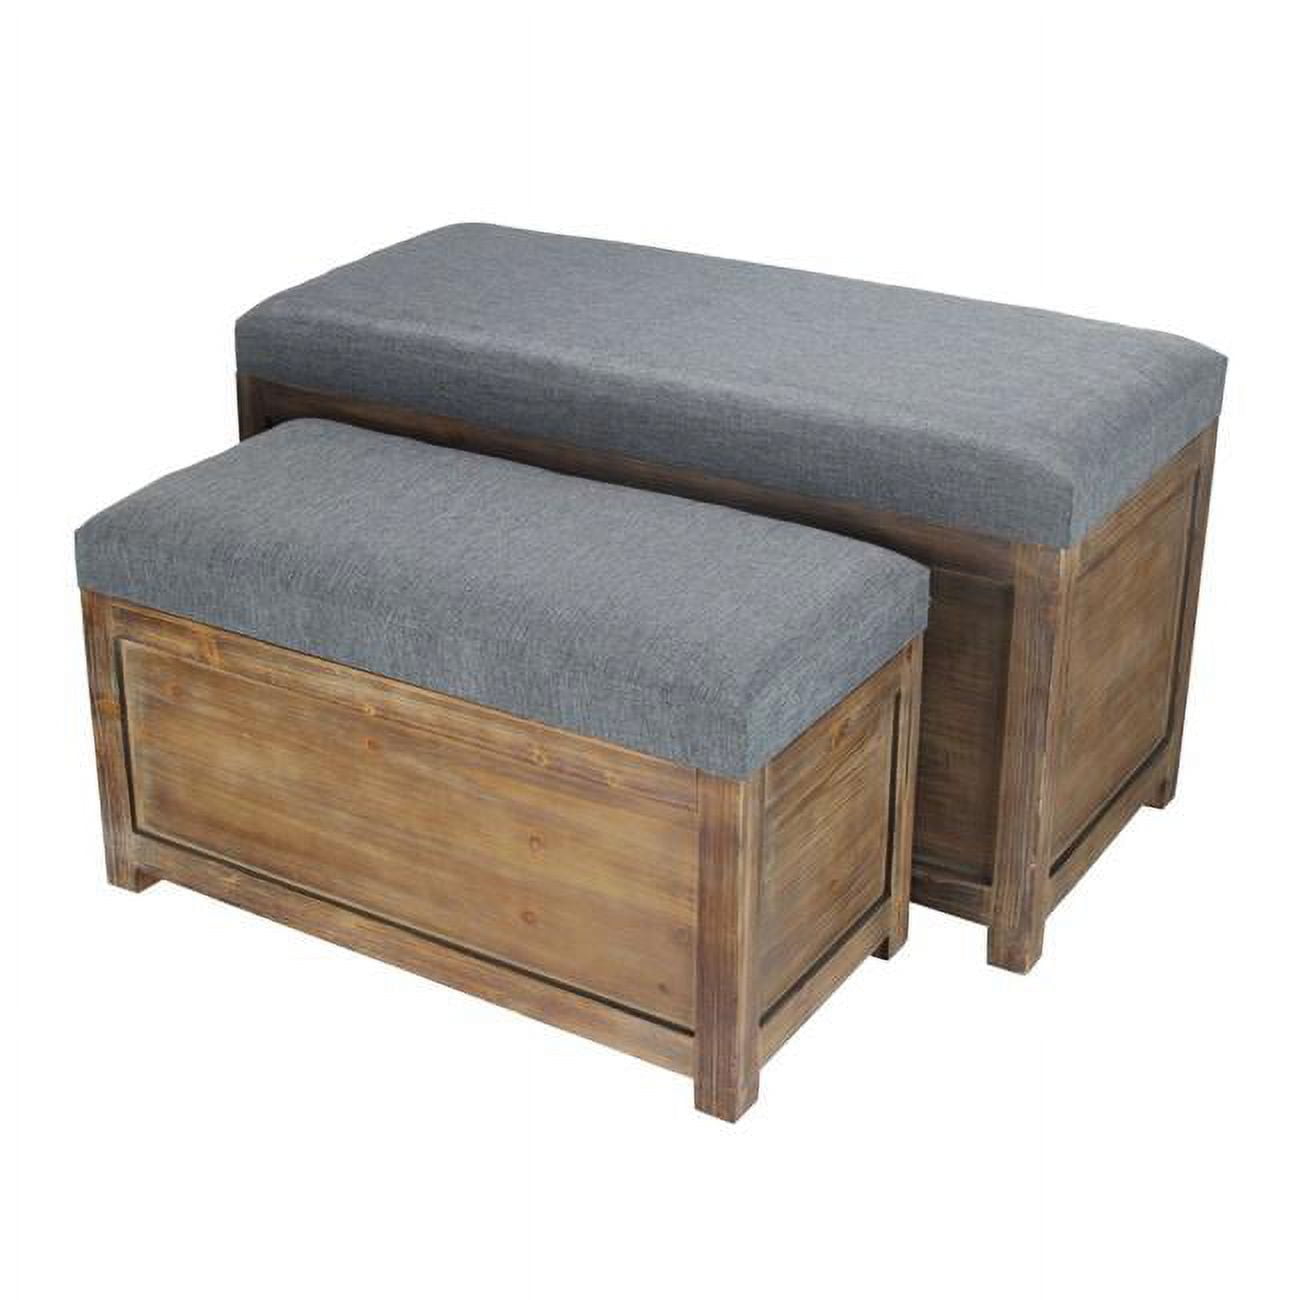 Picture of Cheungs 5159-2 Wooden Storage Bench - Set of 2